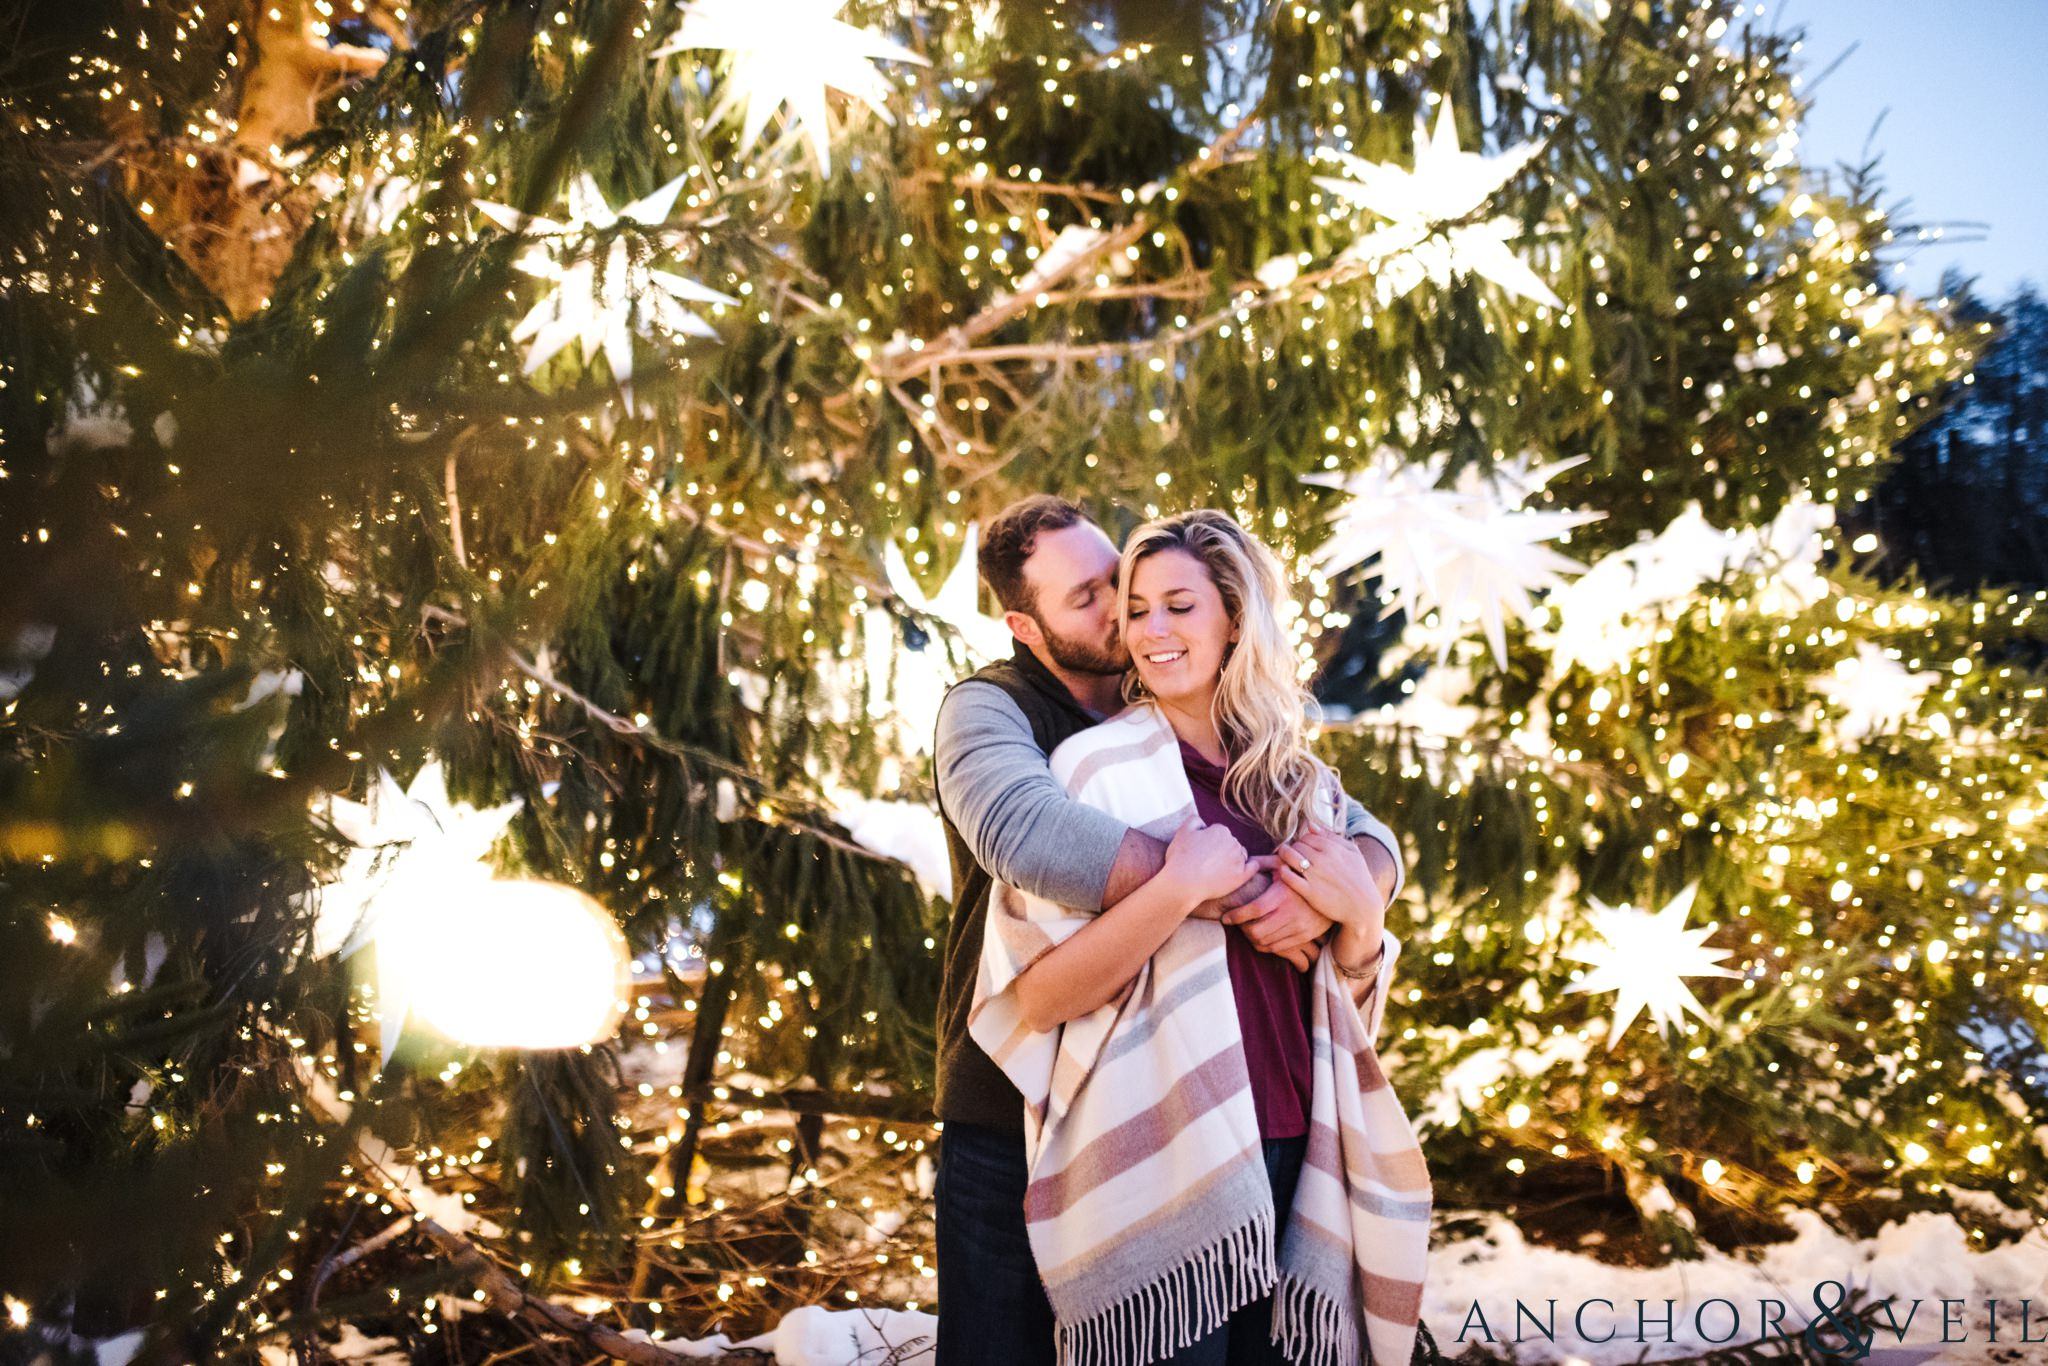 in the Christmas tree during their Snowy Biltmore Engagement Session